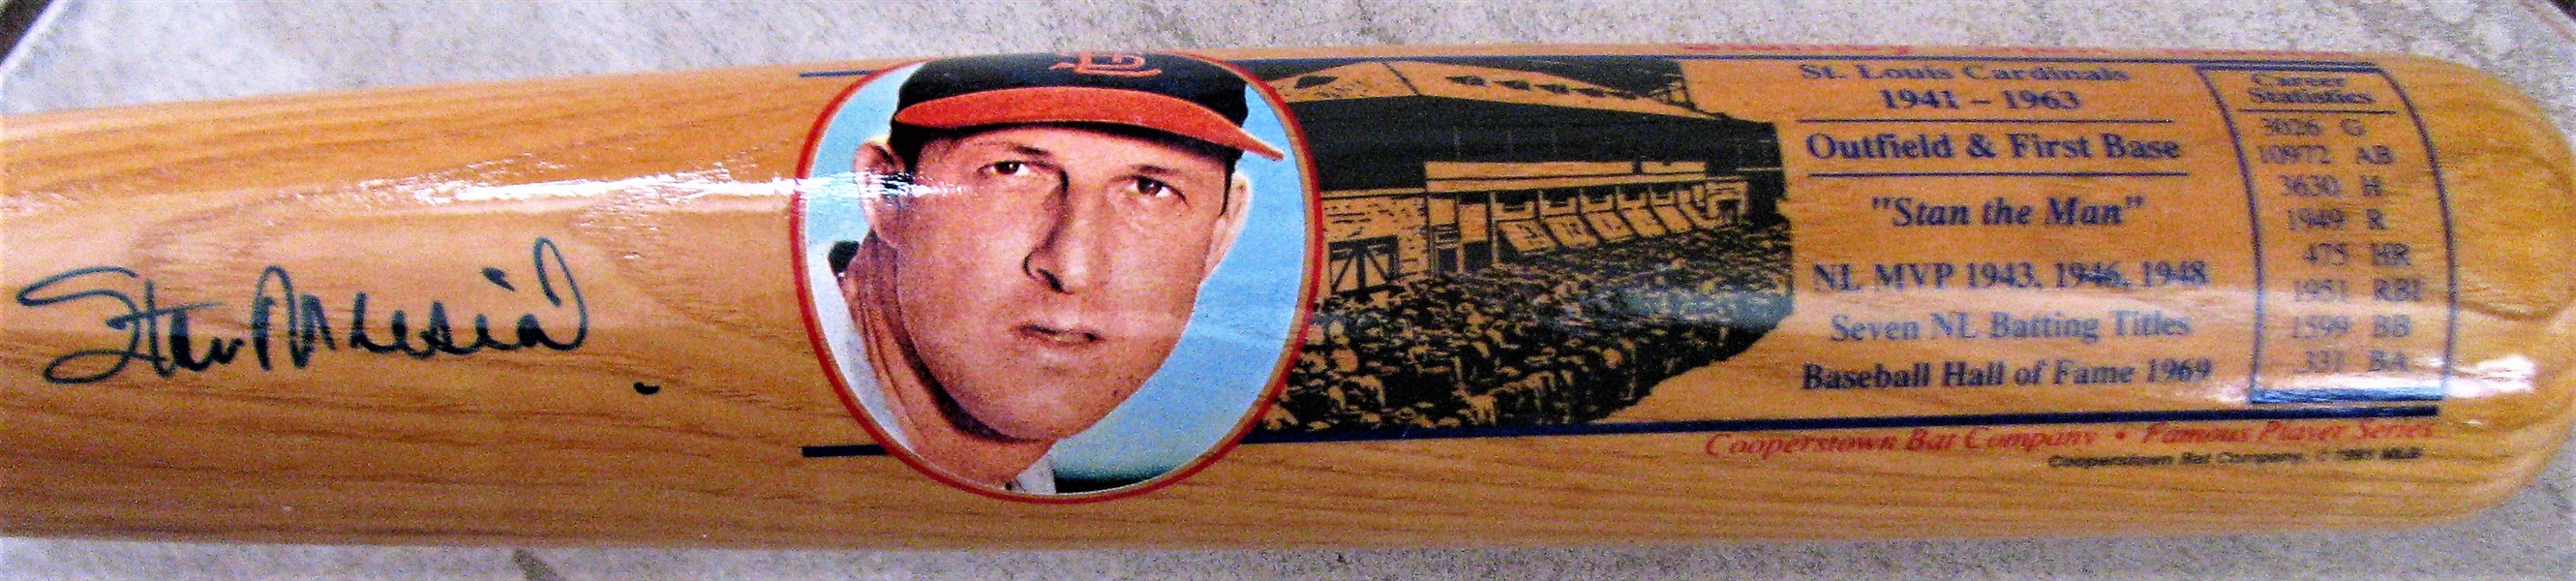 STAN MUSIAL SIGNED COOPERSTWON PICTURE BAT w/SGC COA